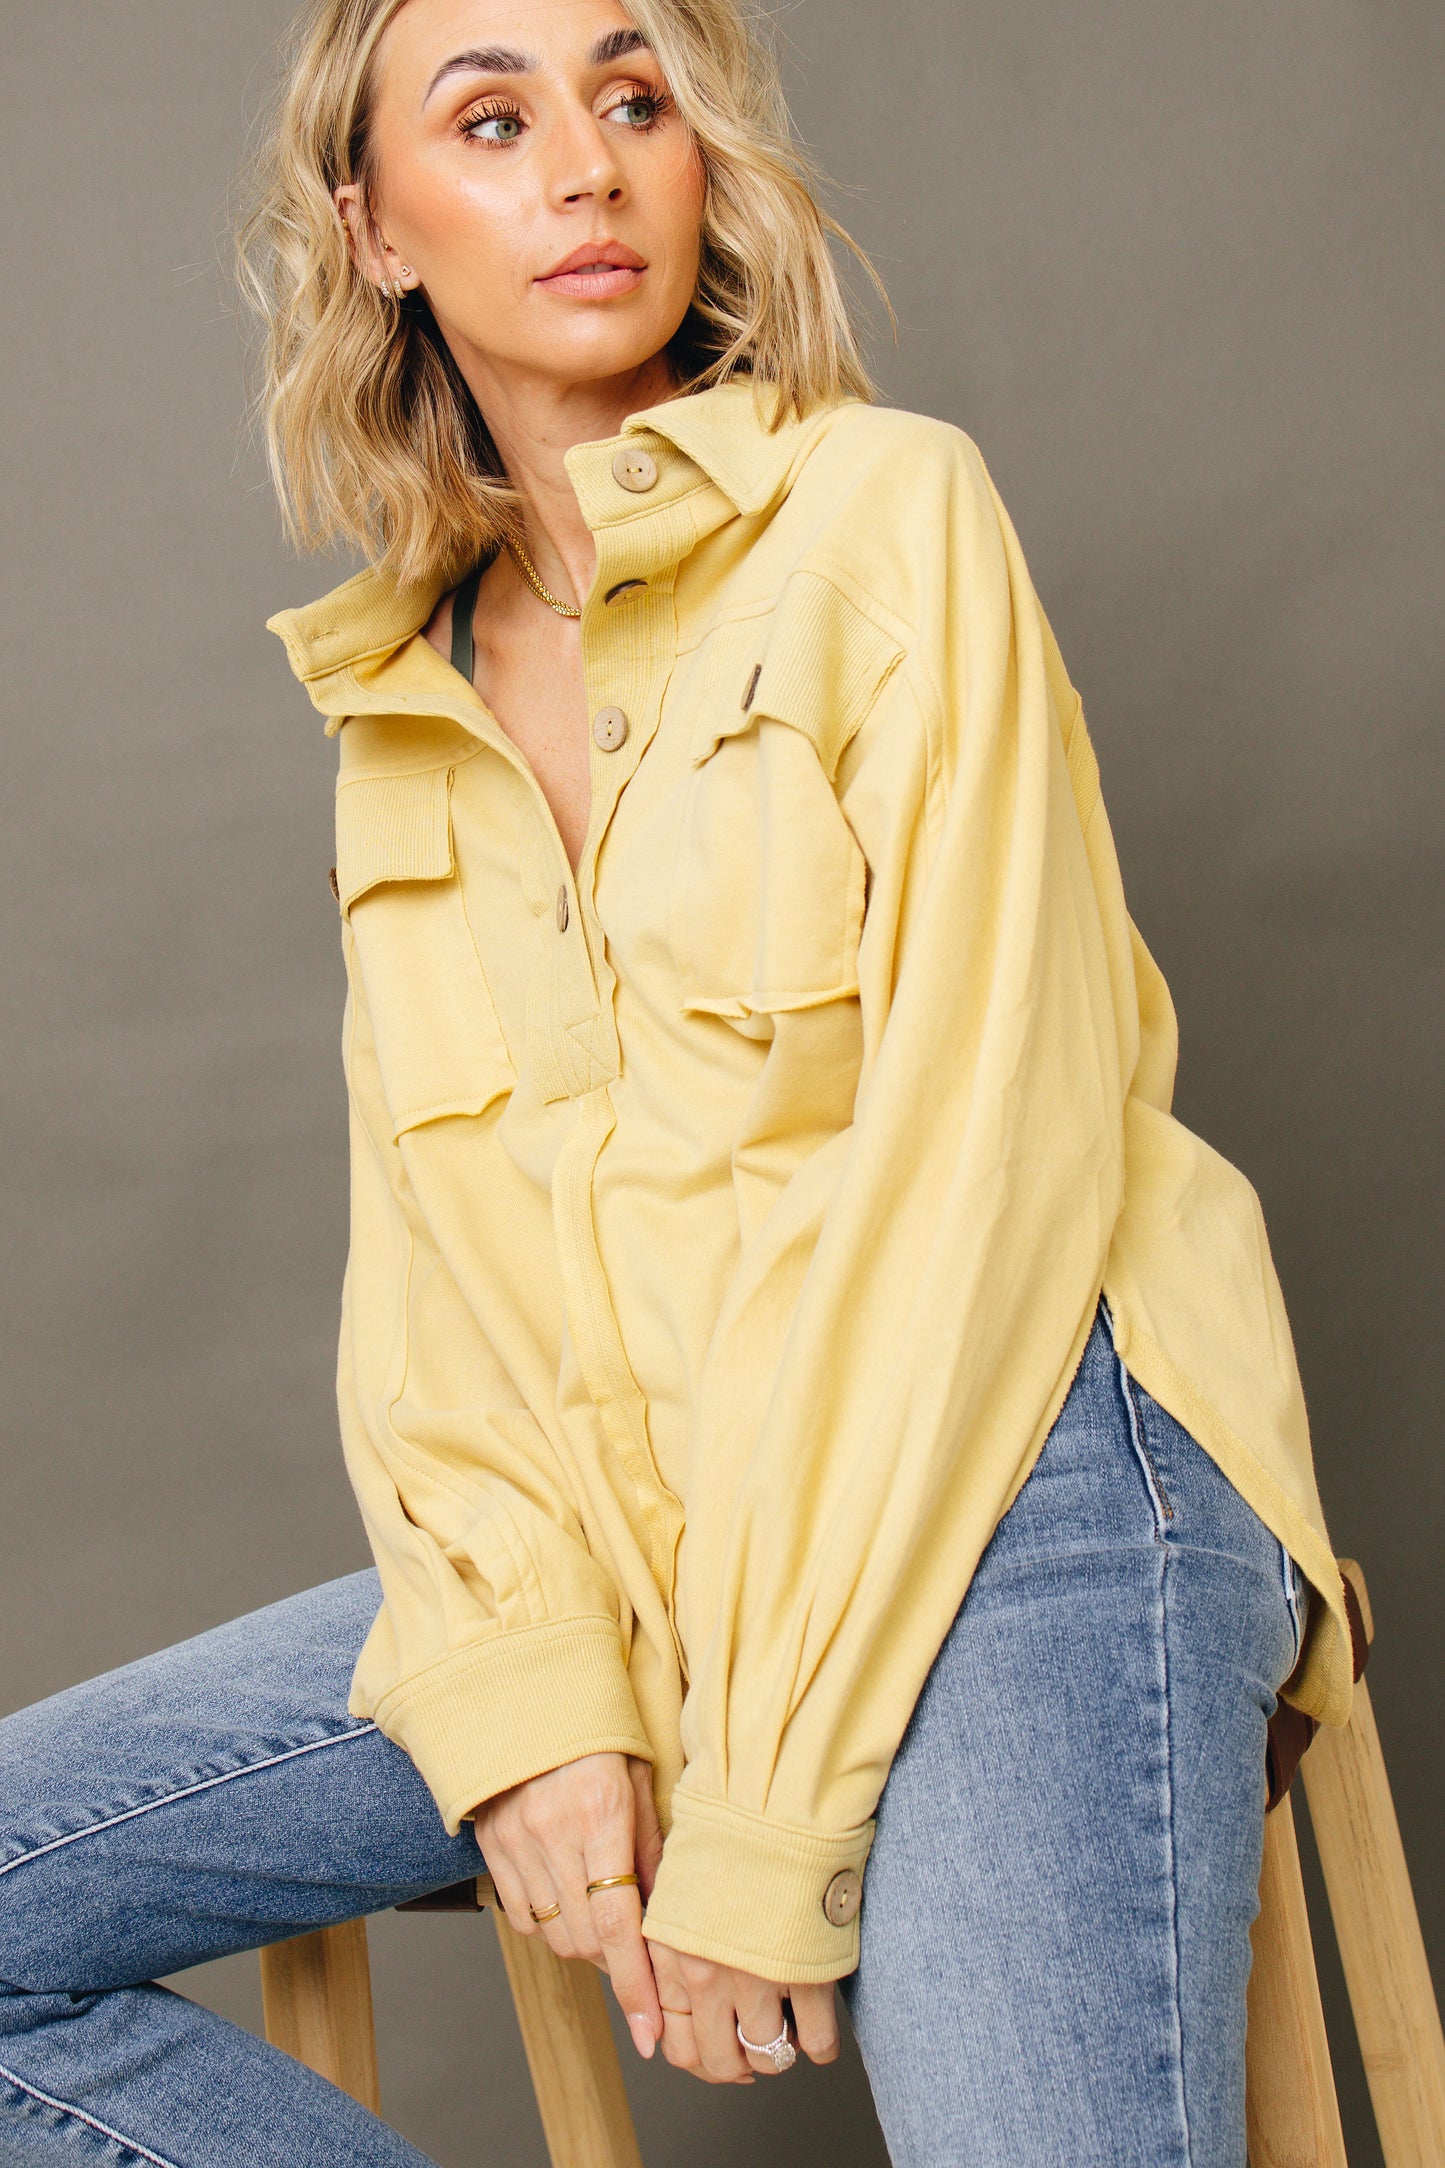 Mellow Yellow French Terry Pullover Top (S-3XL)